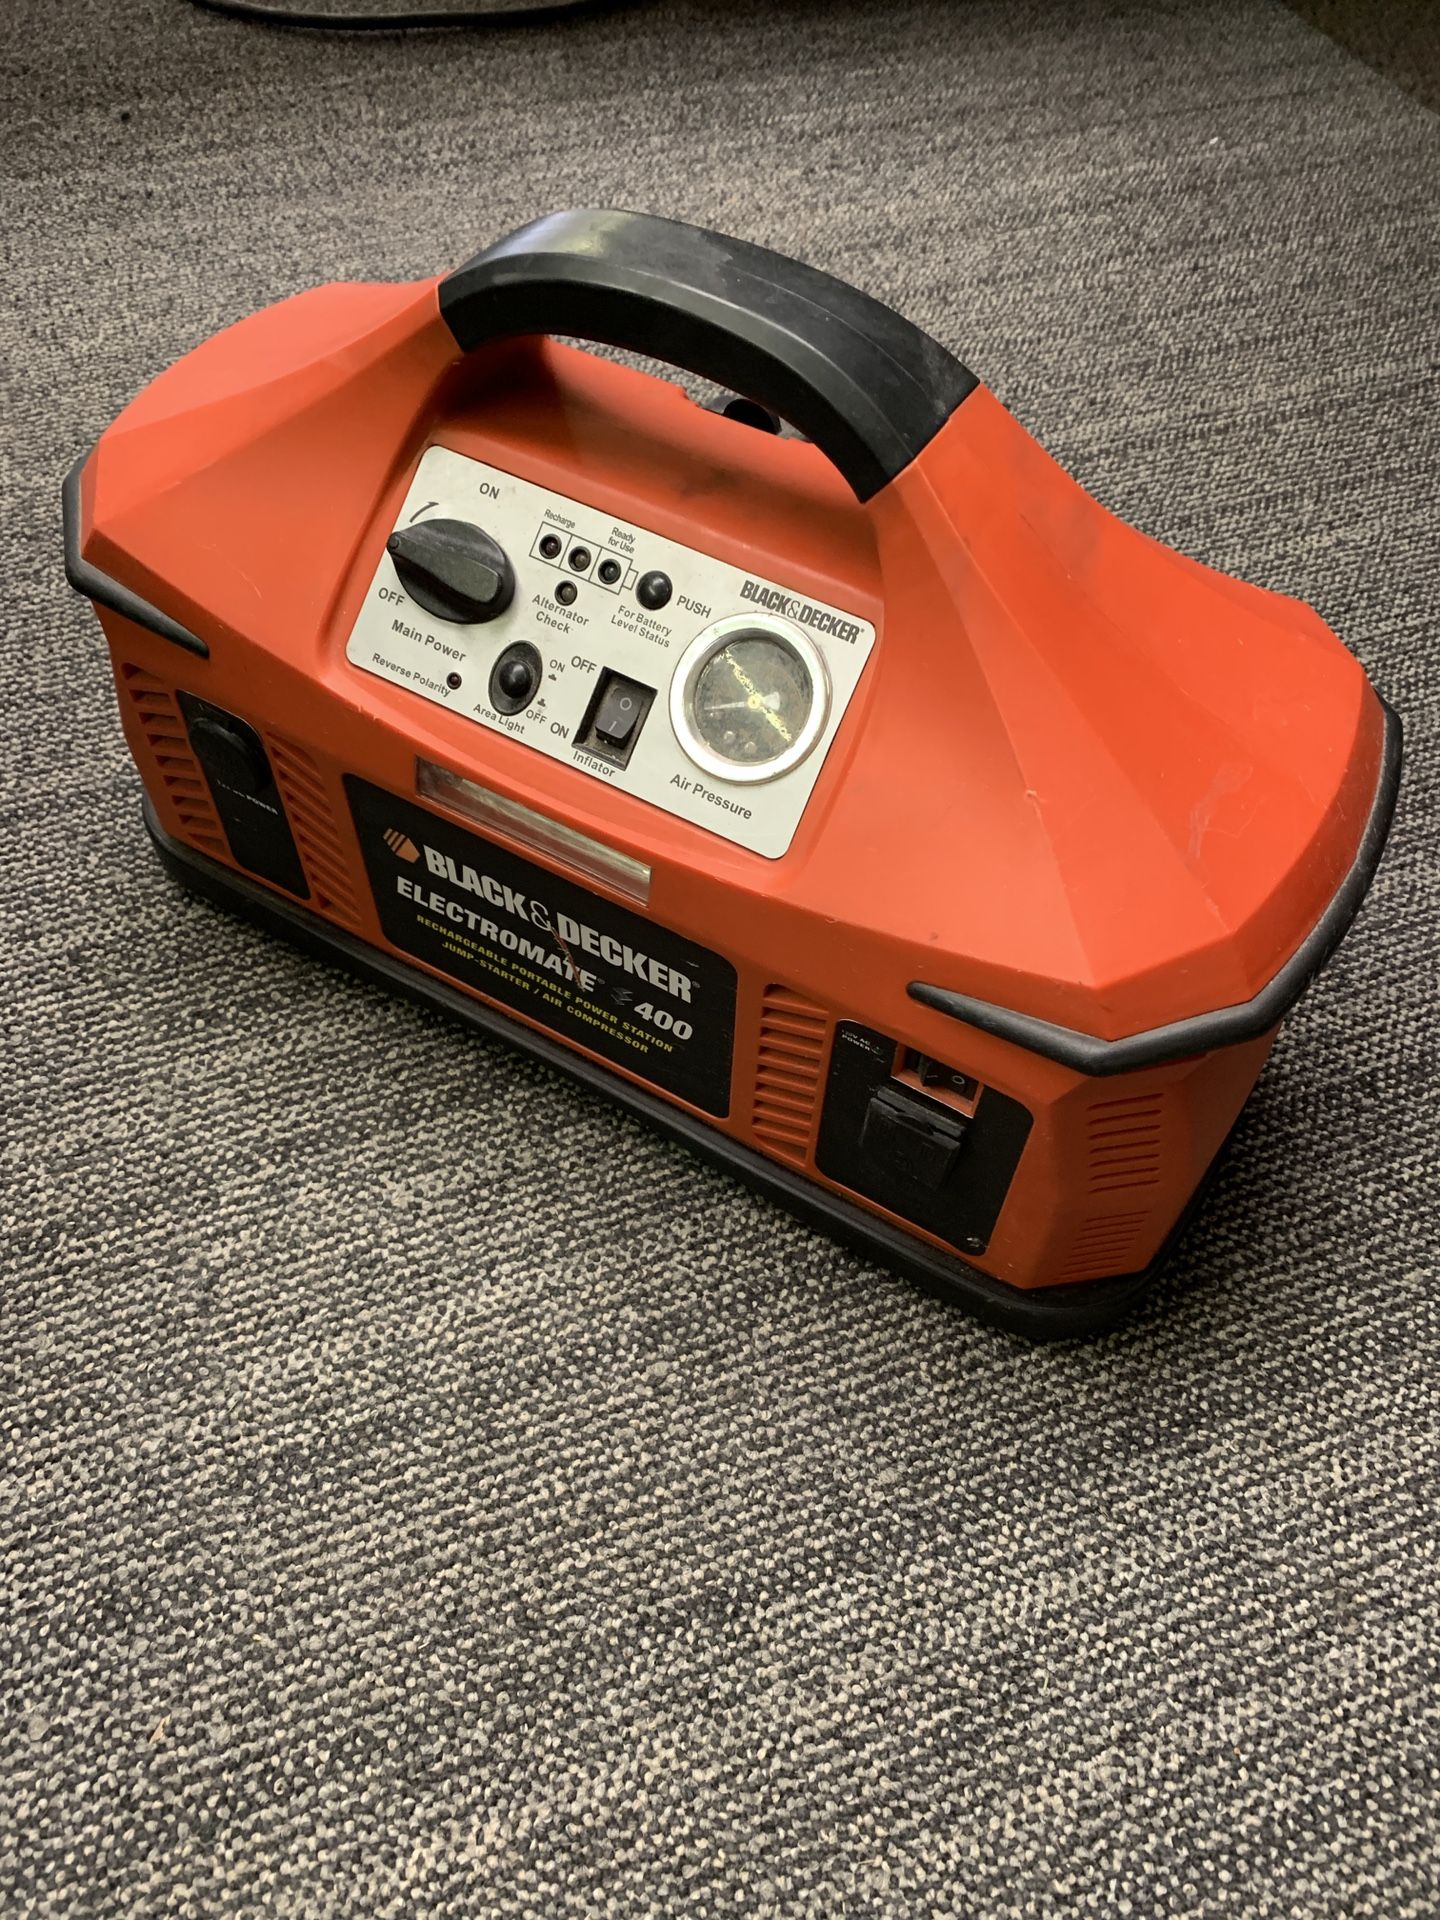 Black & Decker Rechargeable Portable Power Station -Jump Starter - Air  Compressor - Electromate 400 for Sale in Tacoma, WA - OfferUp